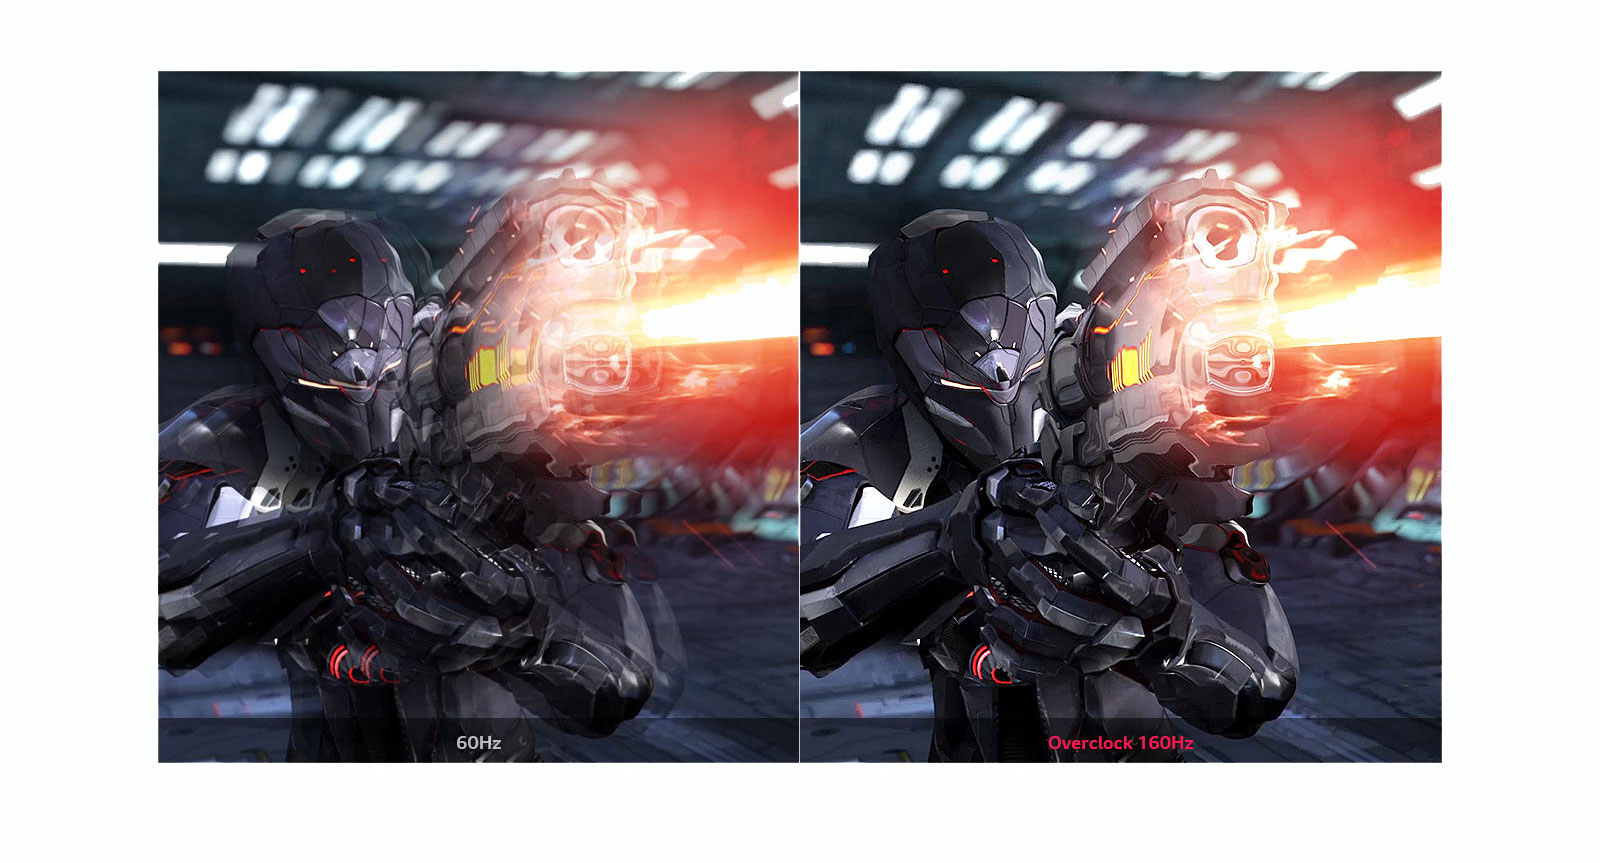 one image splited into two, showing different effect between 60hz and 160hz